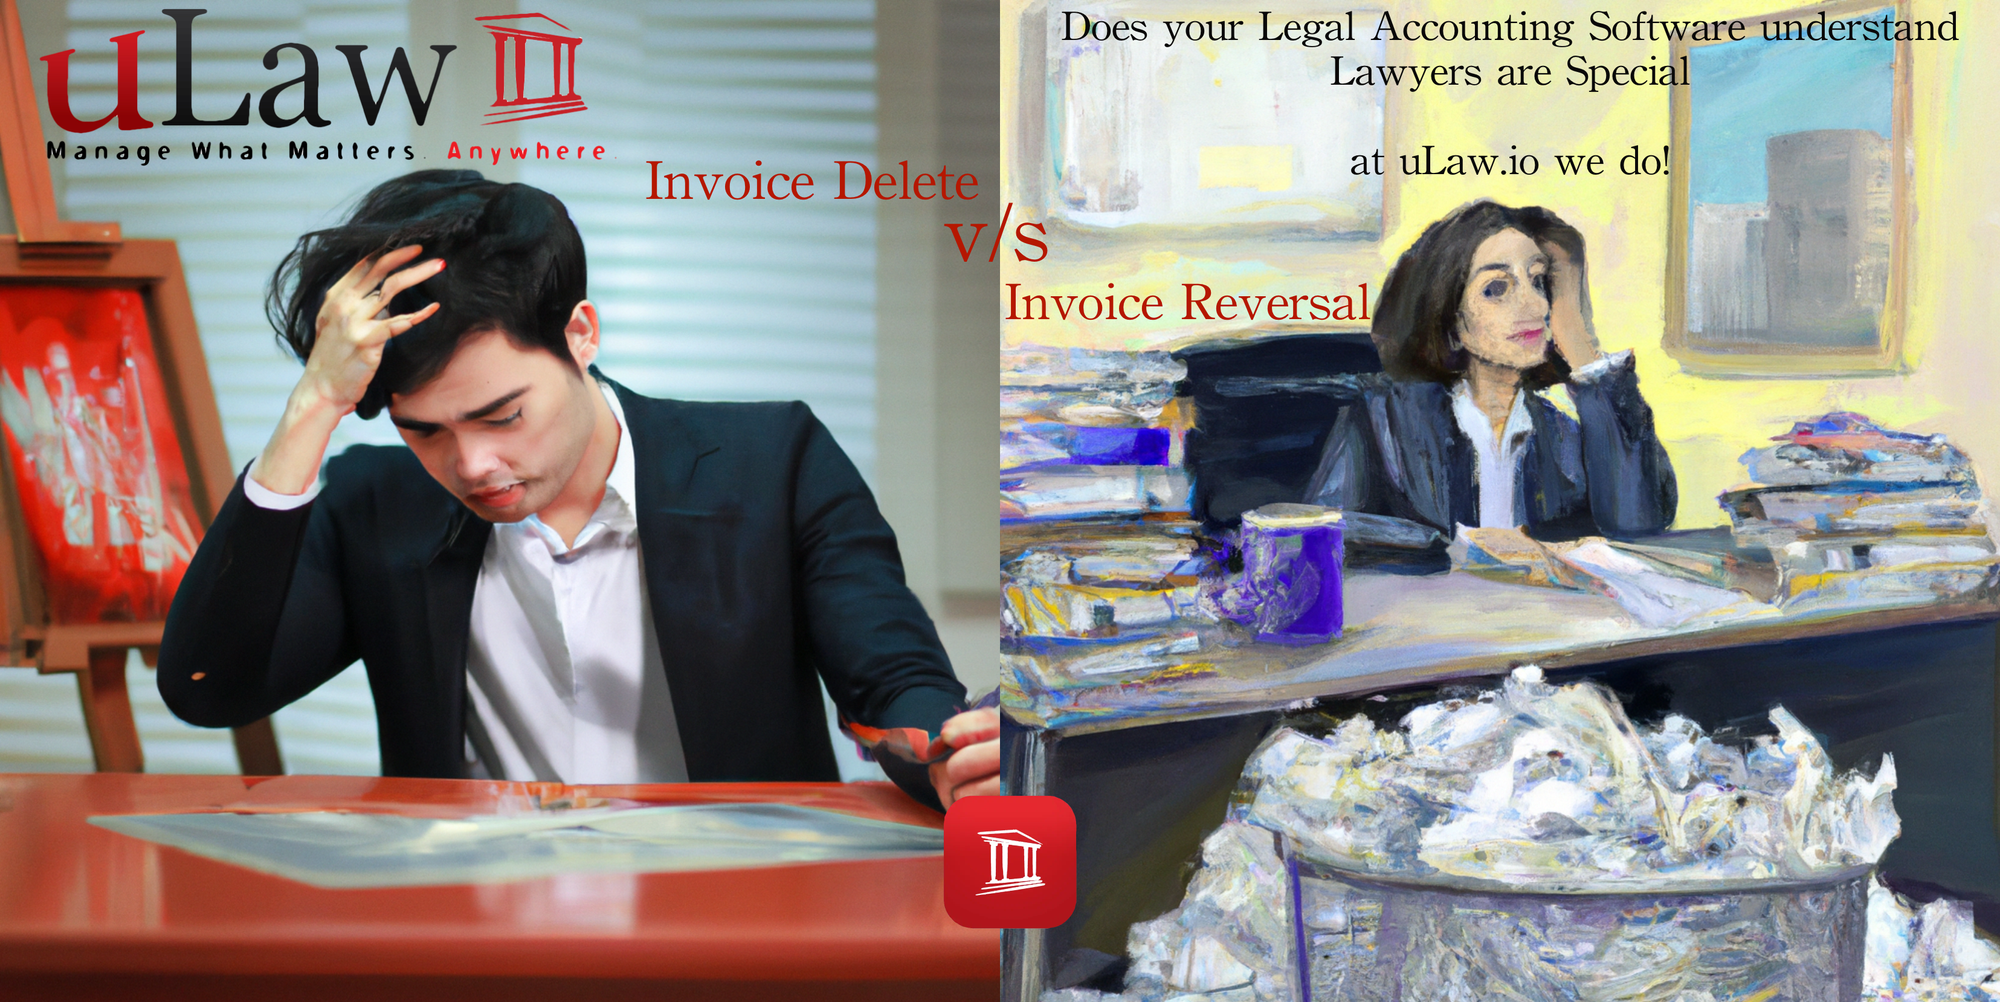 Invoice Delete V/s Reversal, does your legal accounting software even know the difference? uLaw does!